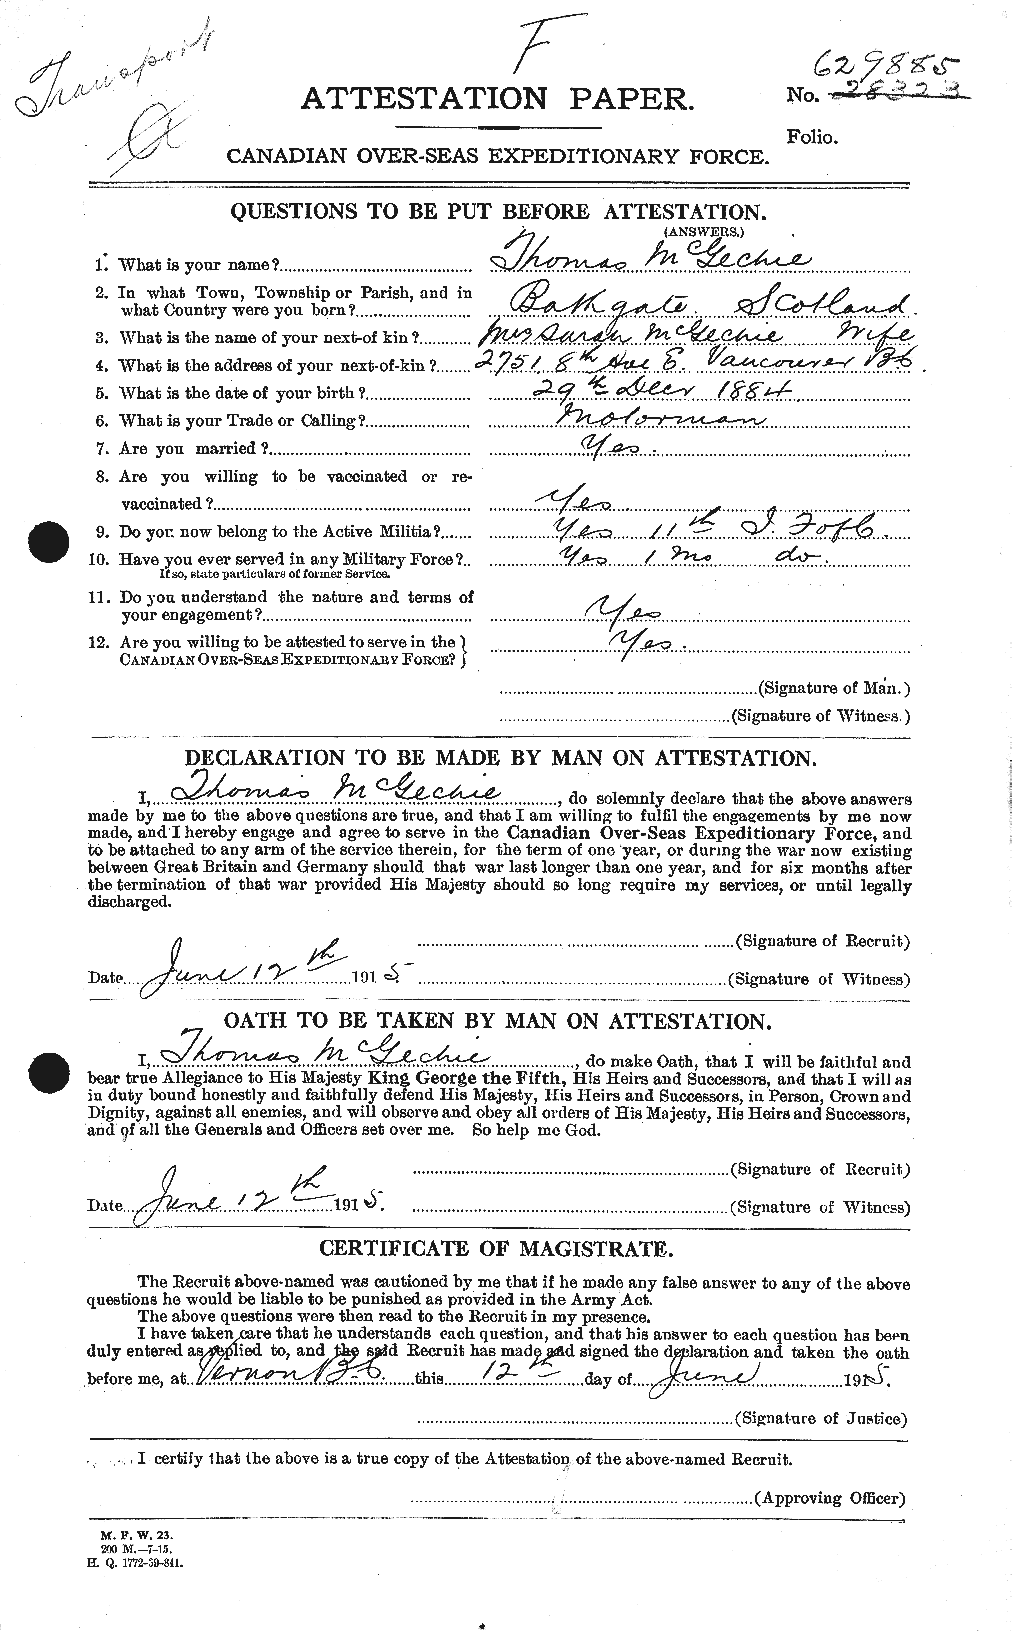 Personnel Records of the First World War - CEF 520418a